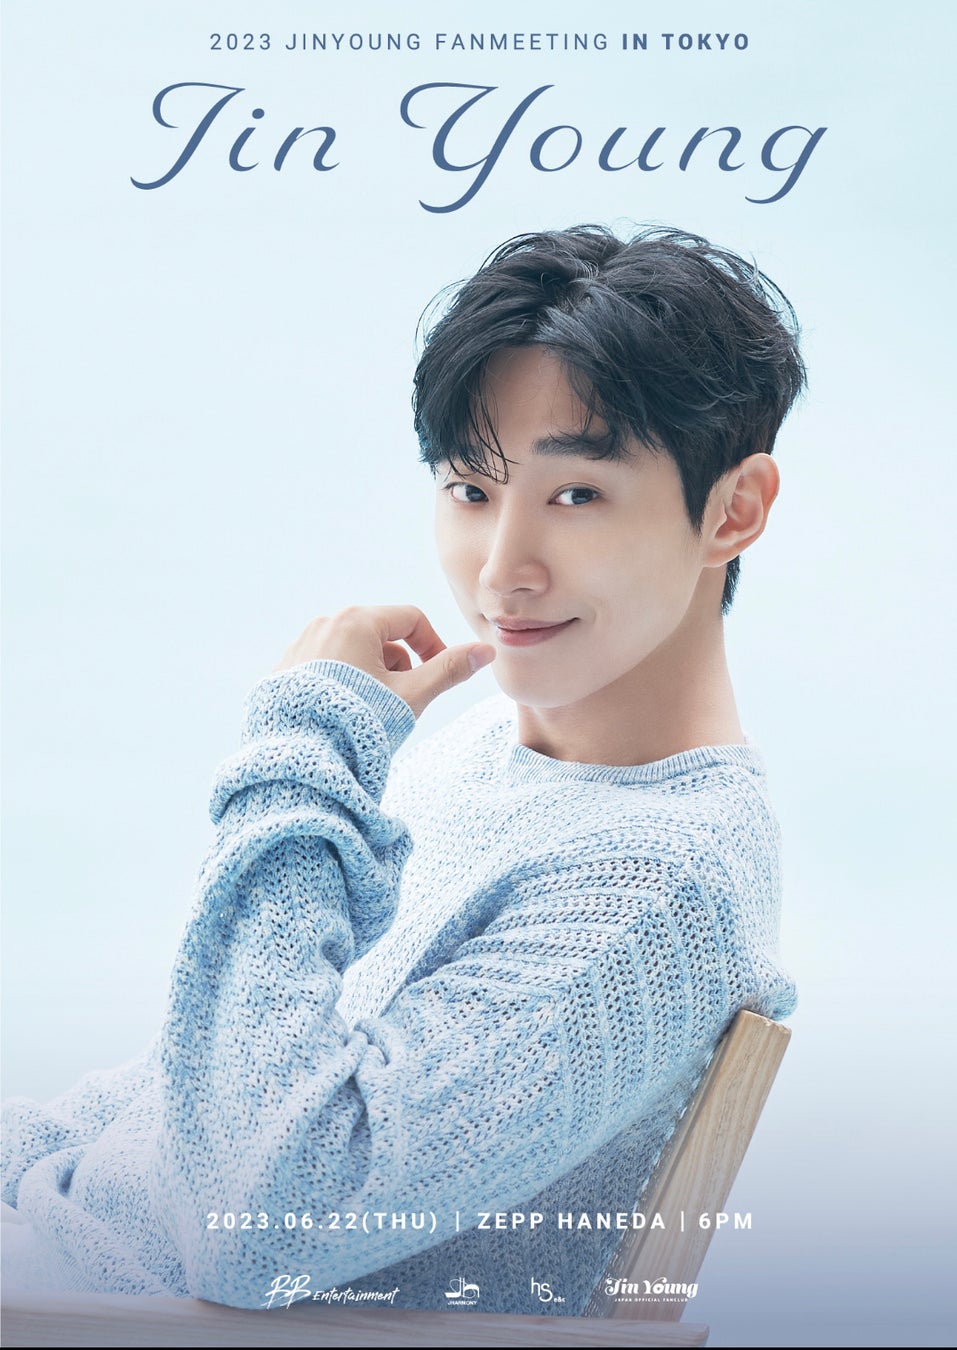 ~2023 JINYOUNG Fanmeeting in TOKYO~ Newポスター公開！！のサブ画像1